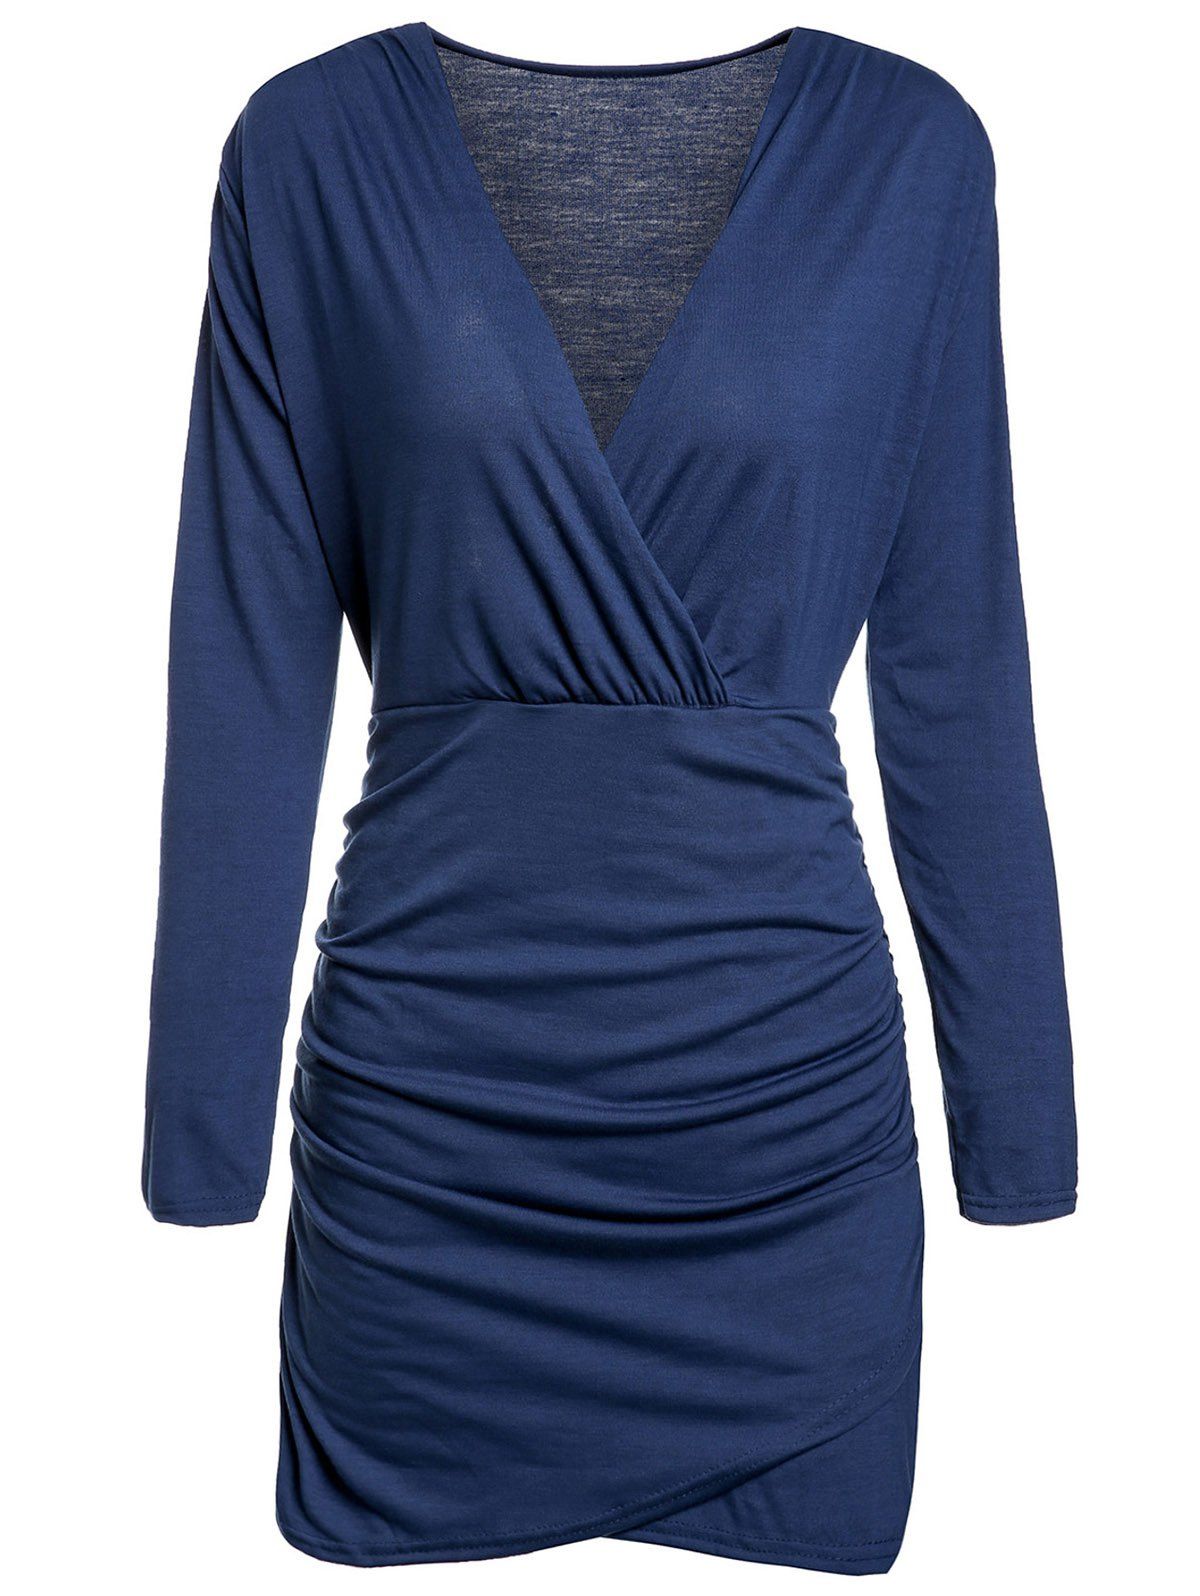 2018 Deep Plunging Neck Long Sleeve Bodycon Wrap Dress In Blue M ...